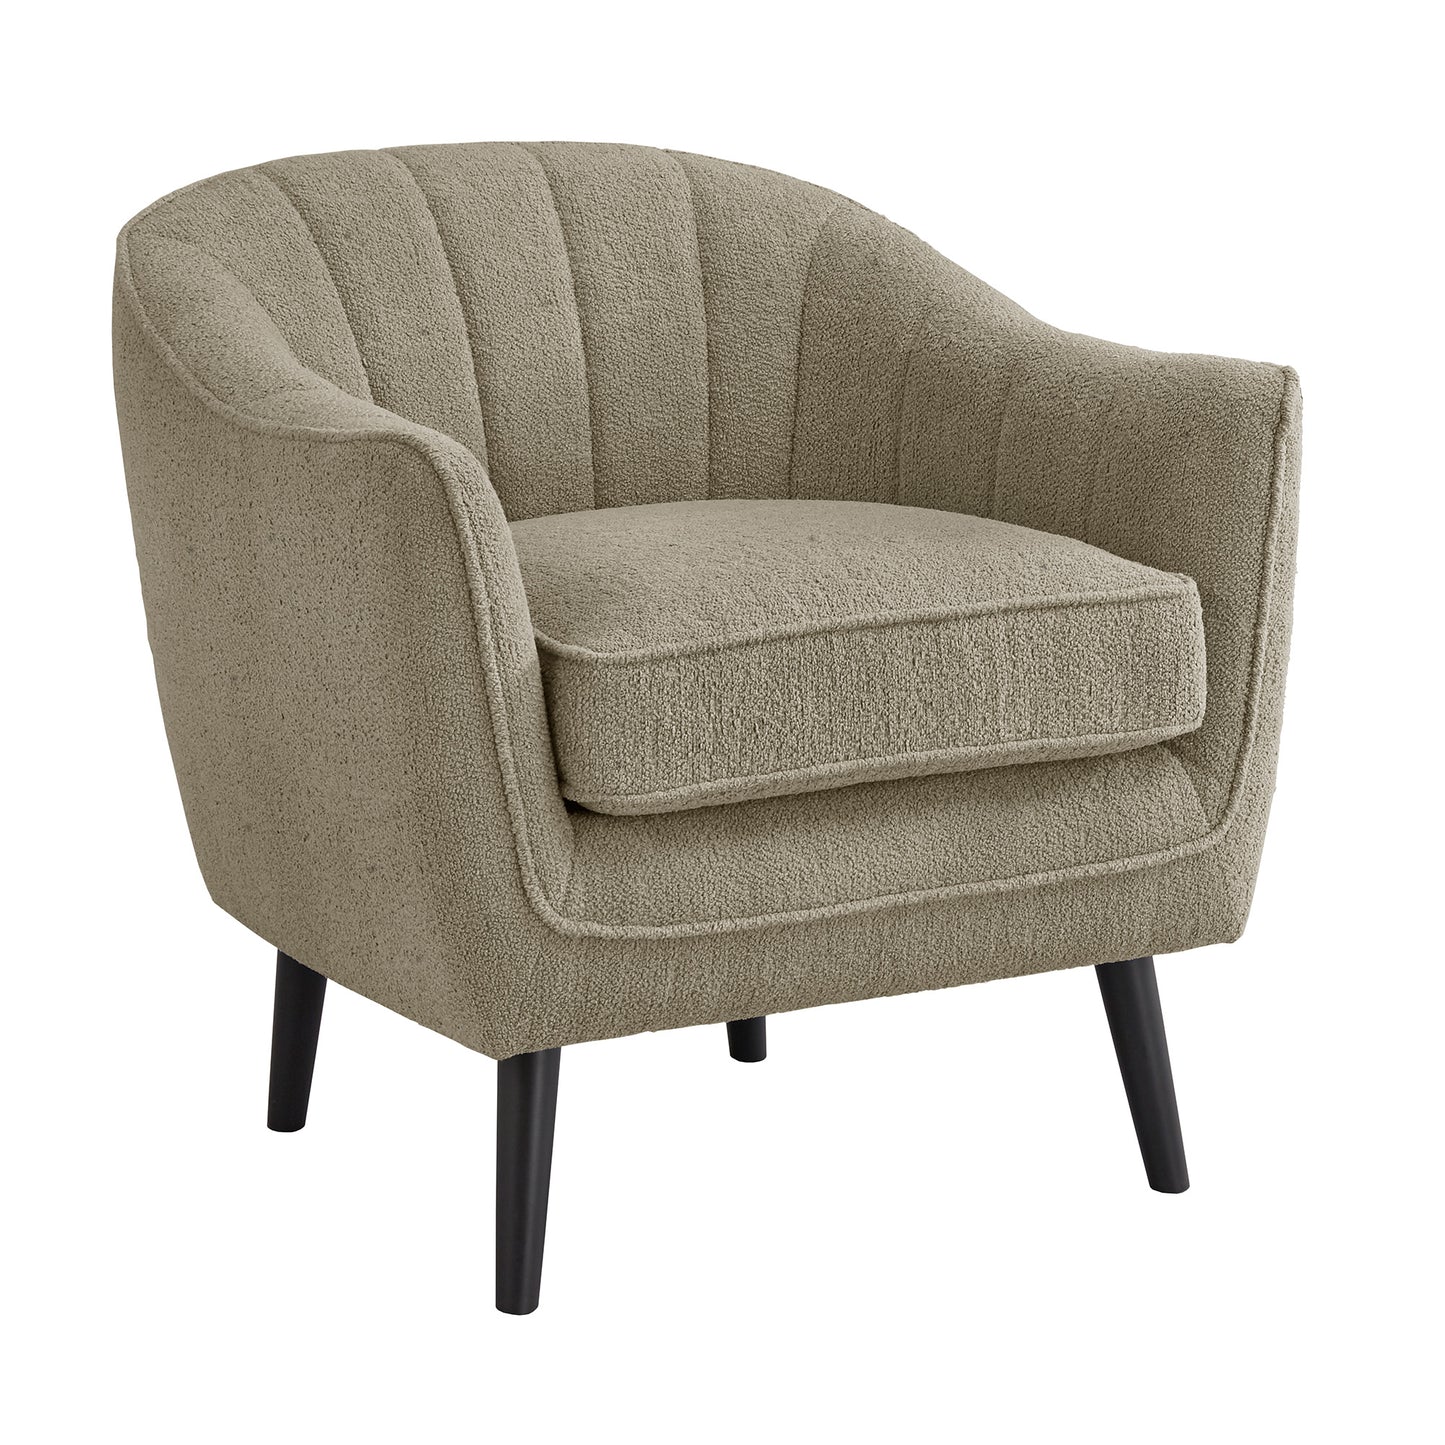 Mid-Century Modern Channel-Tufted Accent Chair with Removable Cushion Cover - Taupe